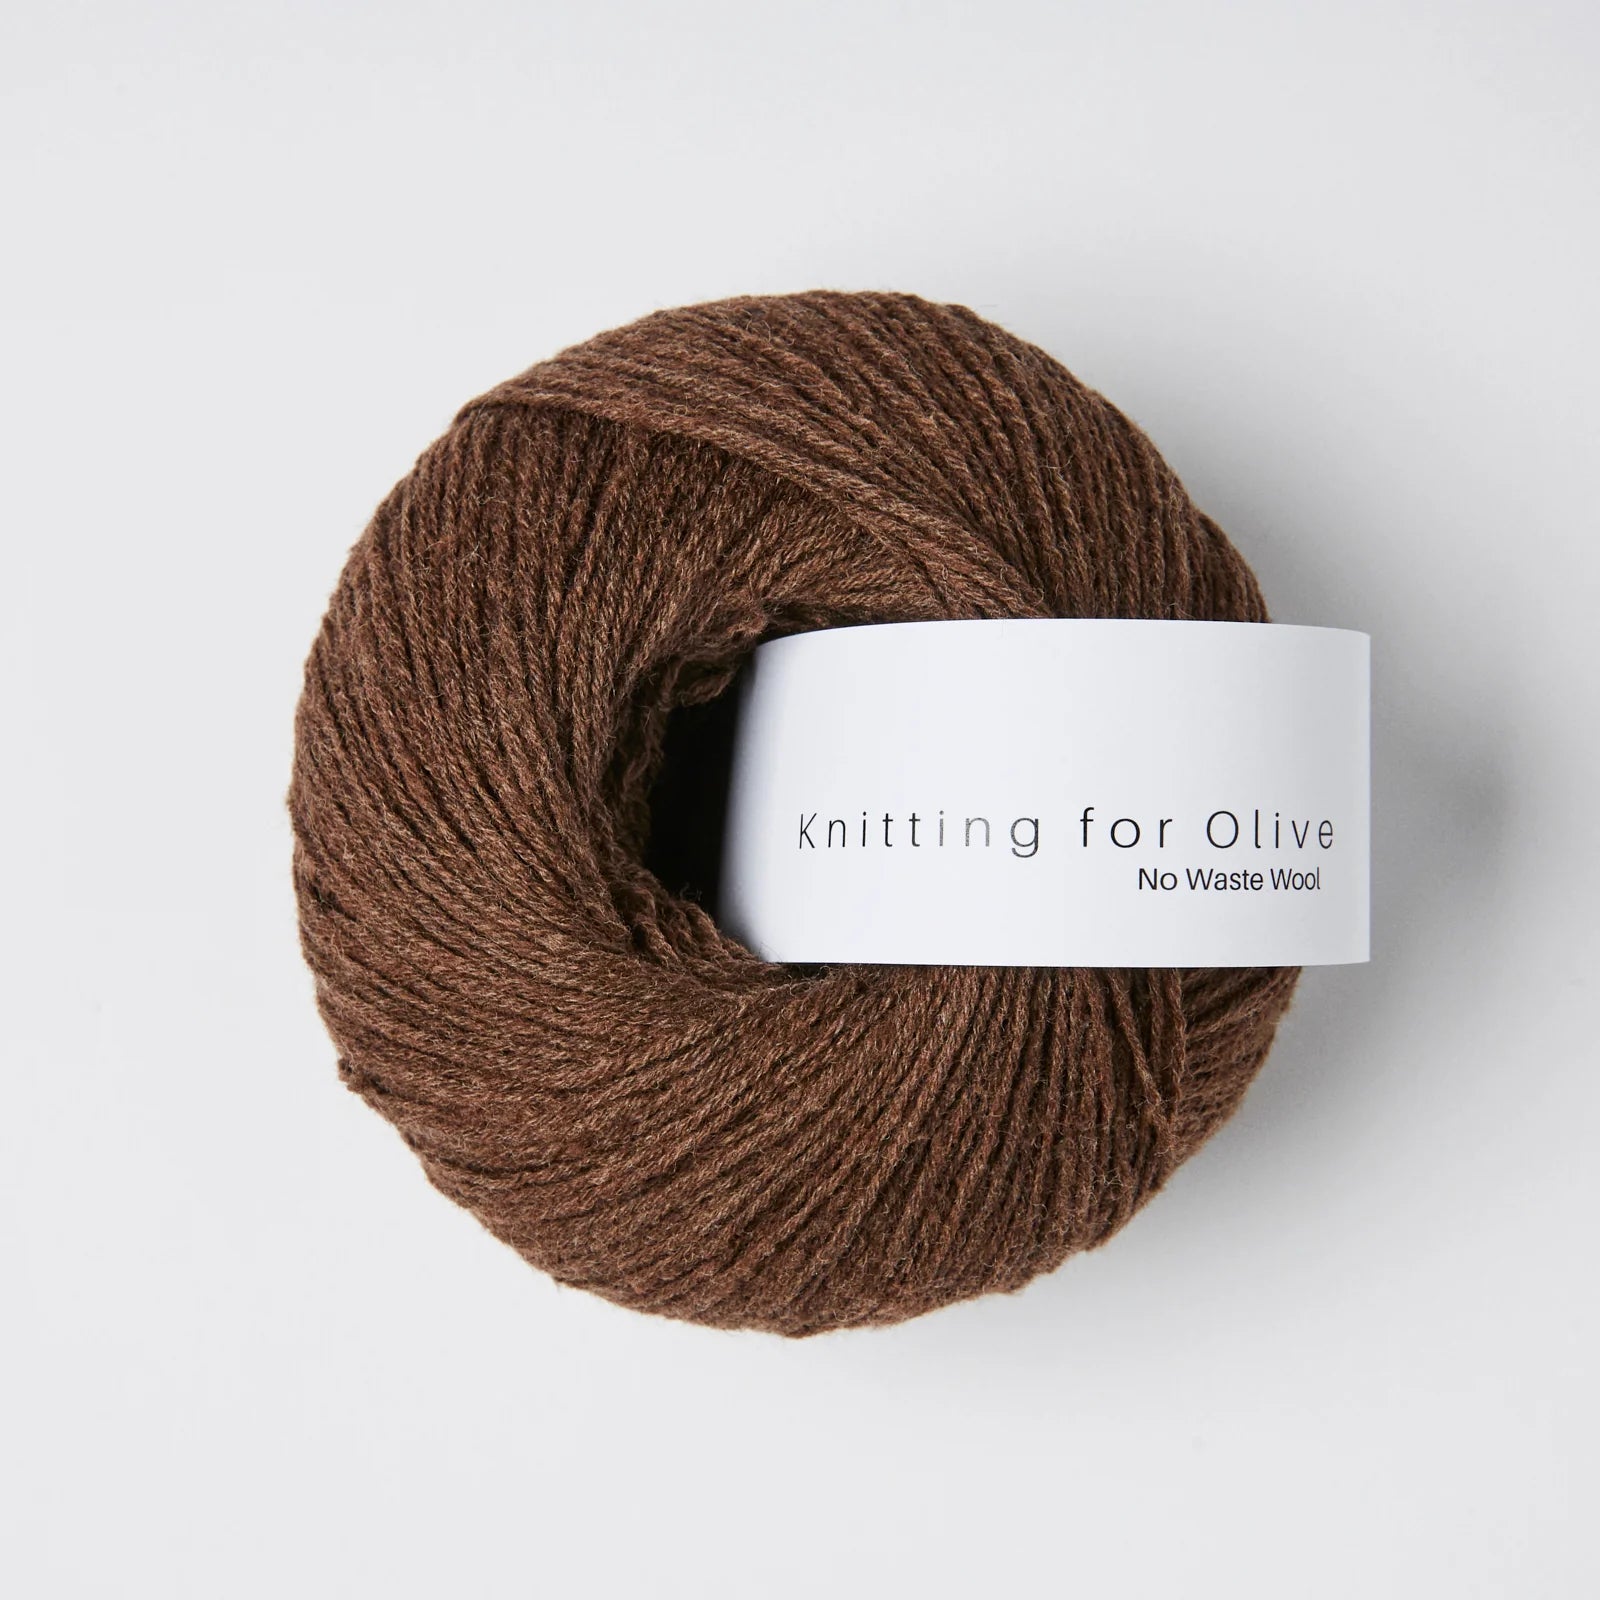 Knitting for Olive No Waste Wool - Knitting for Olive - Chocolate - The Little Yarn Store